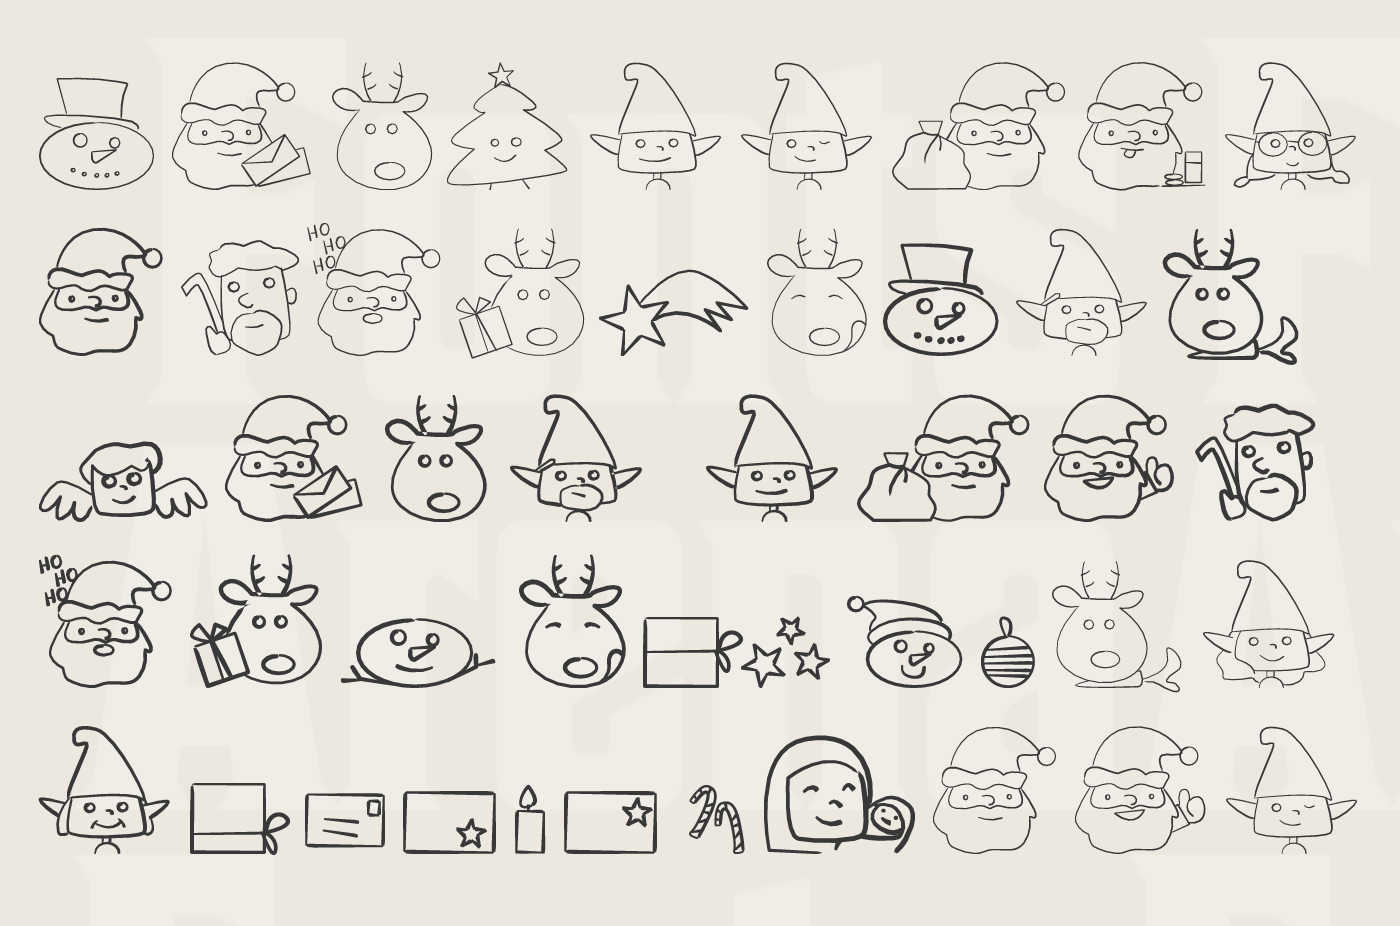 Christmas People Ding free icon font